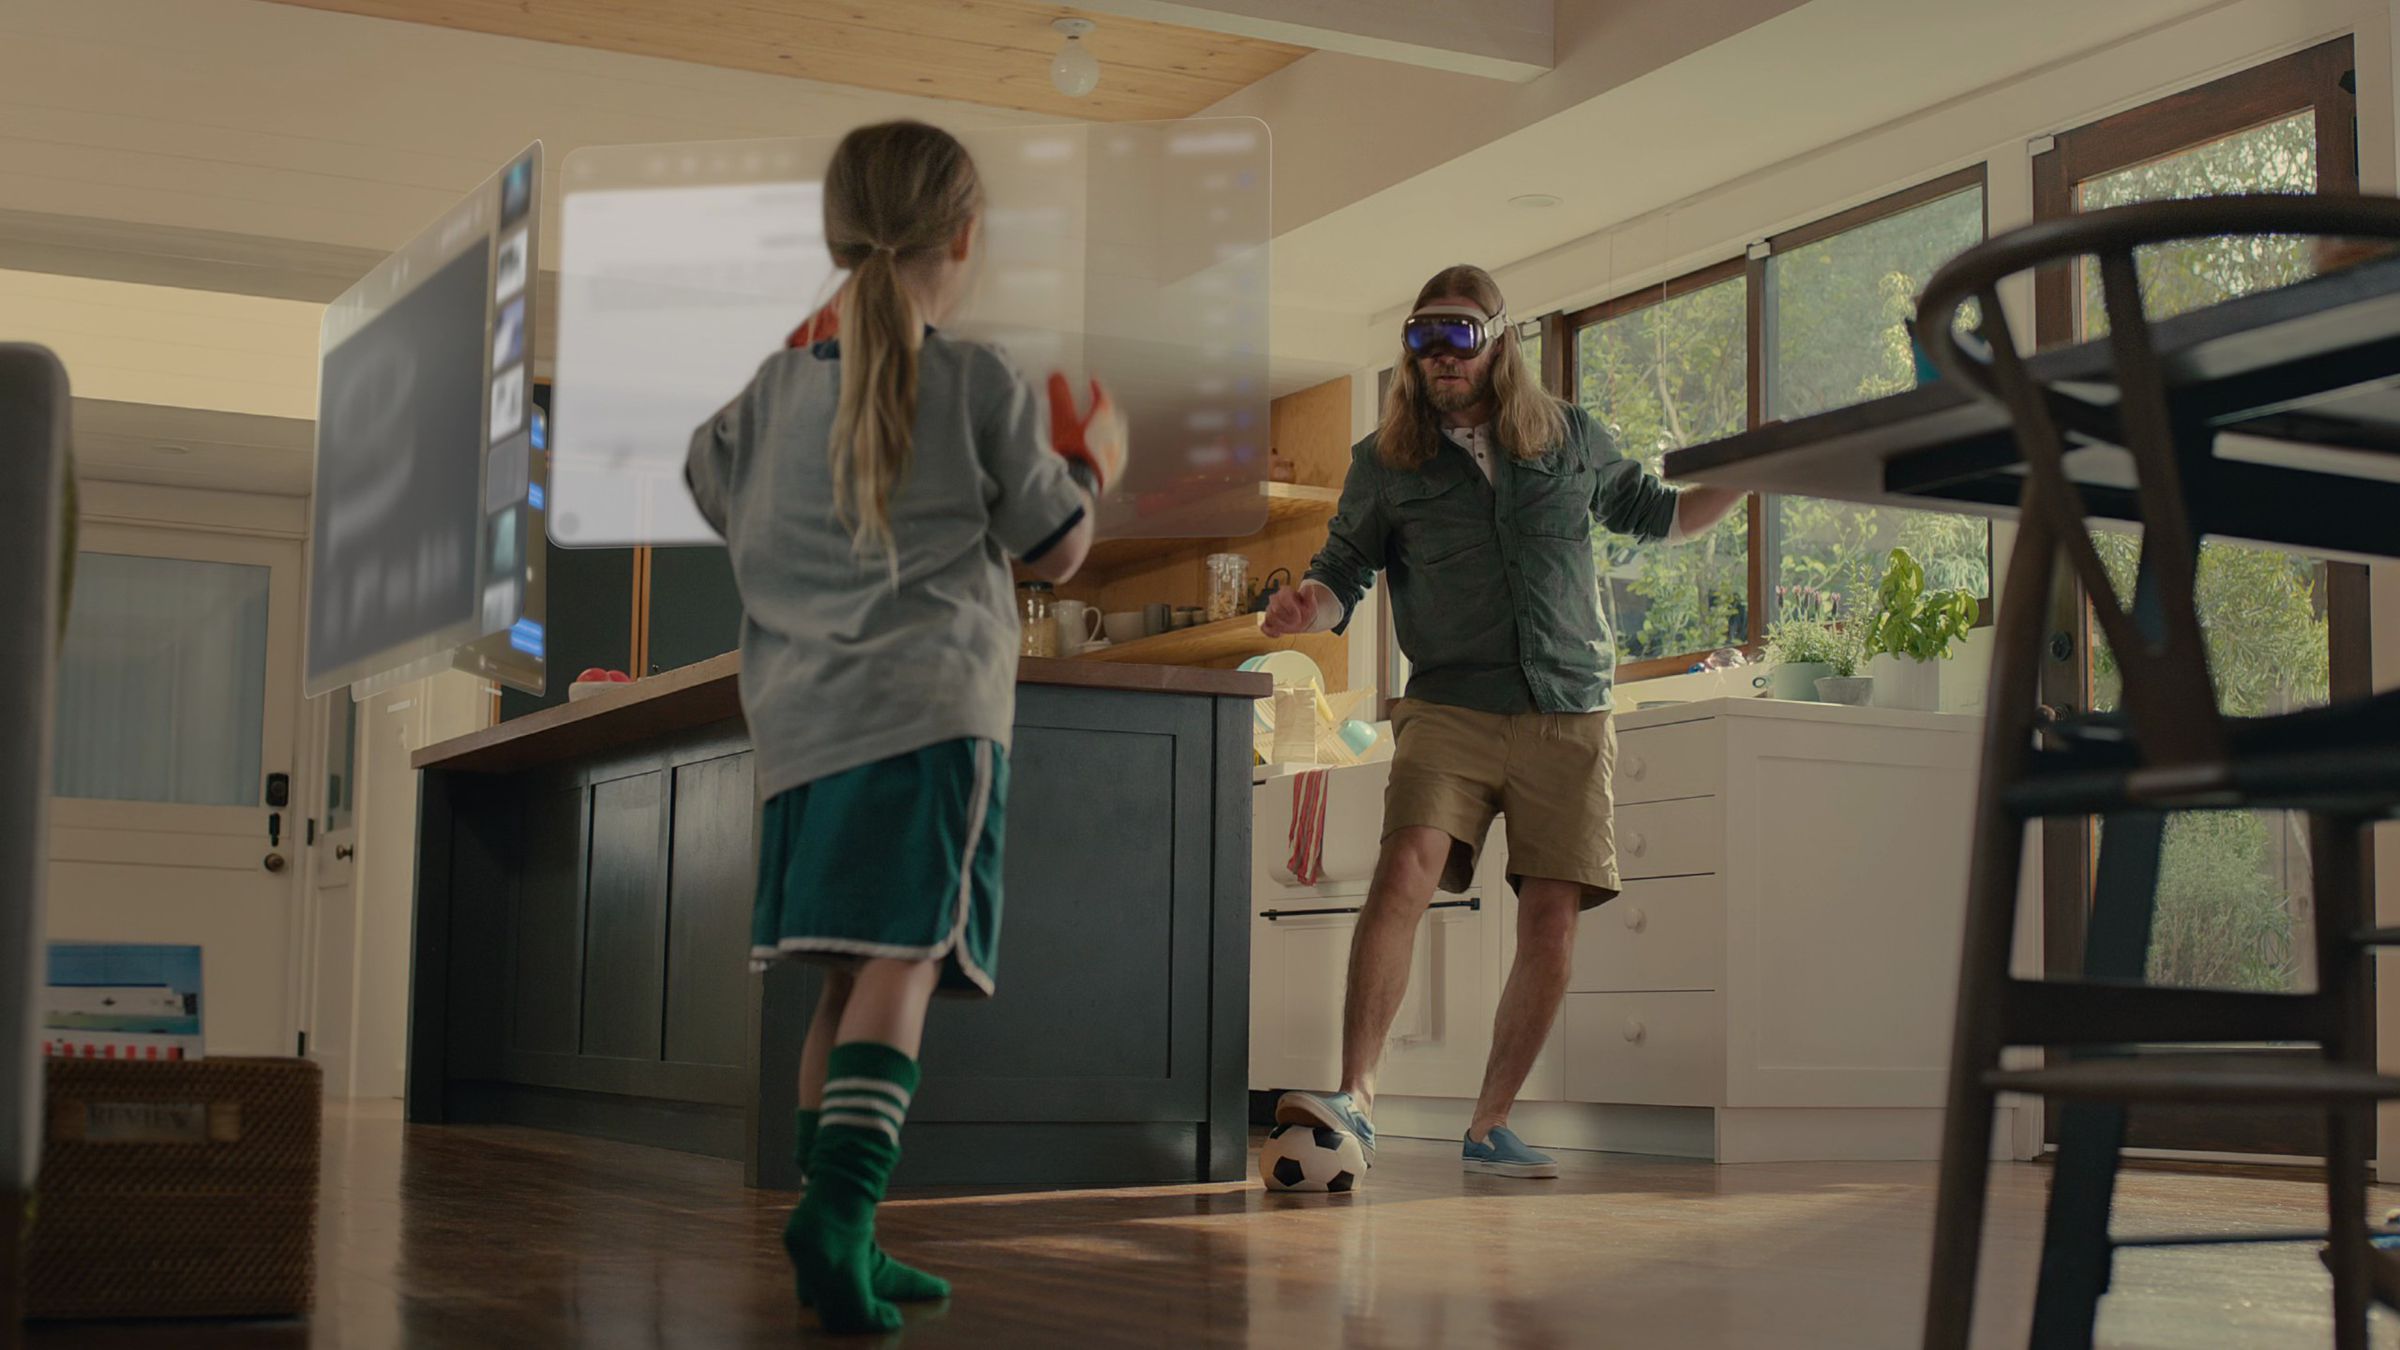 Still capture from keynote video showing parent with headset kicking a soccer ball to child.